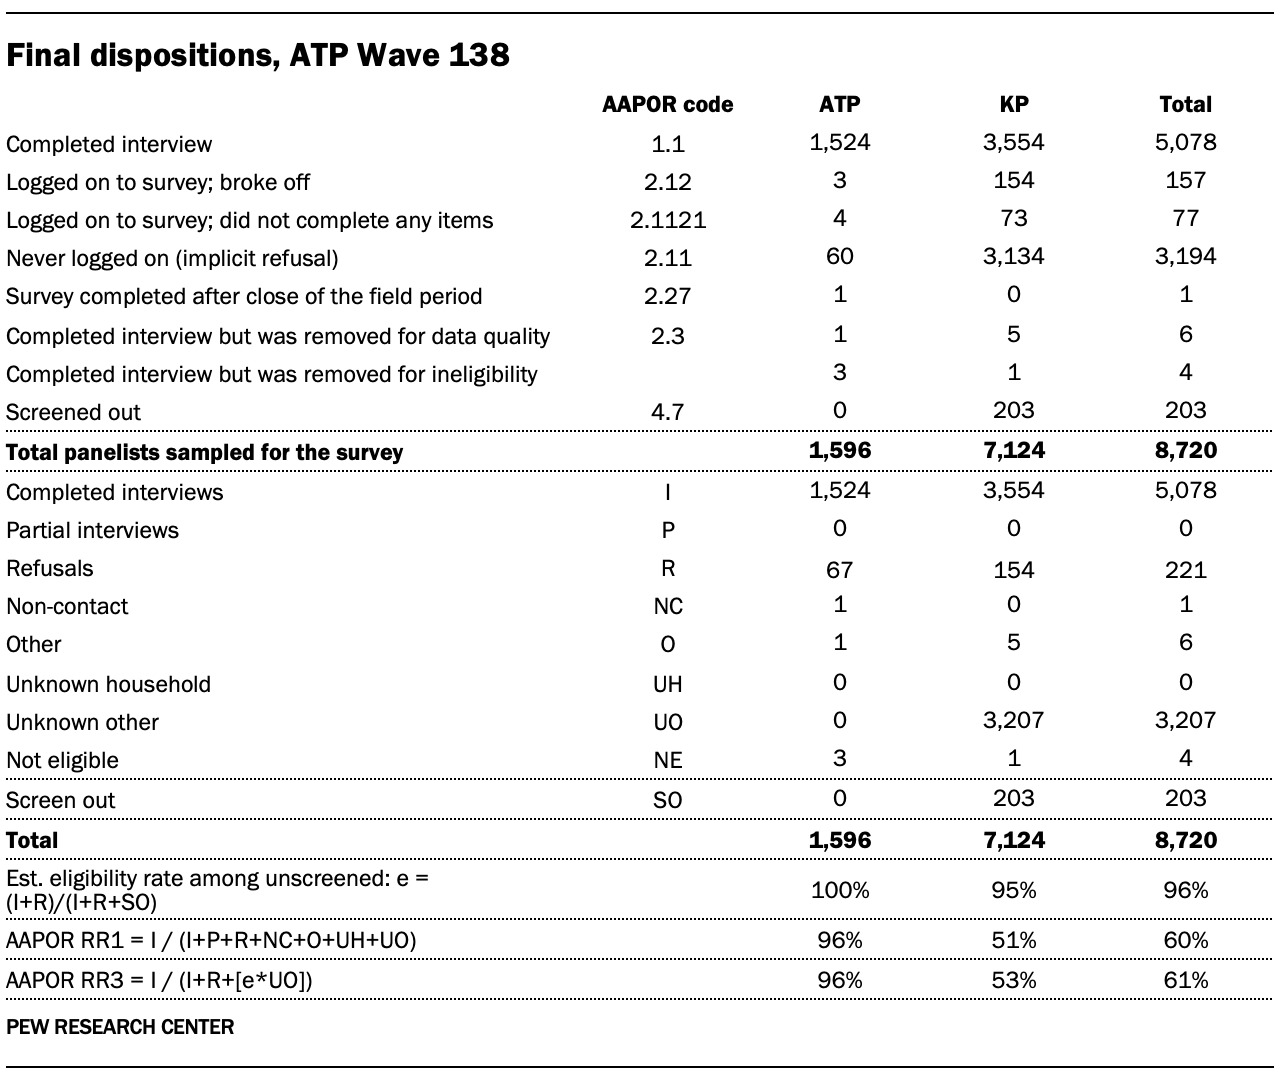 A table showing Sample sizes and margins of error for ATP Wave 138